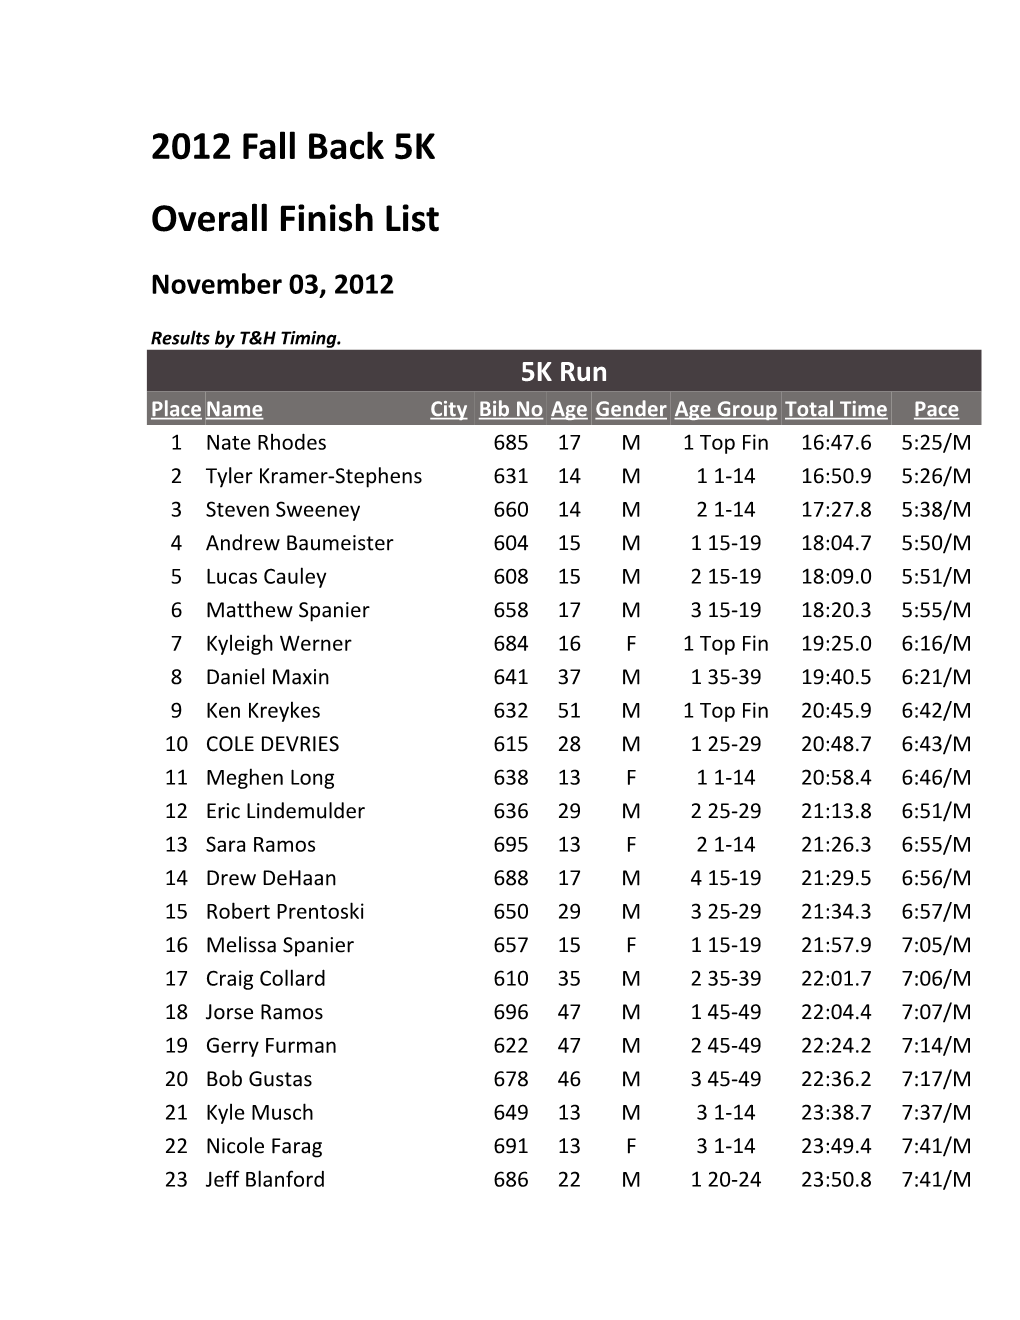 Overall Finish List s5